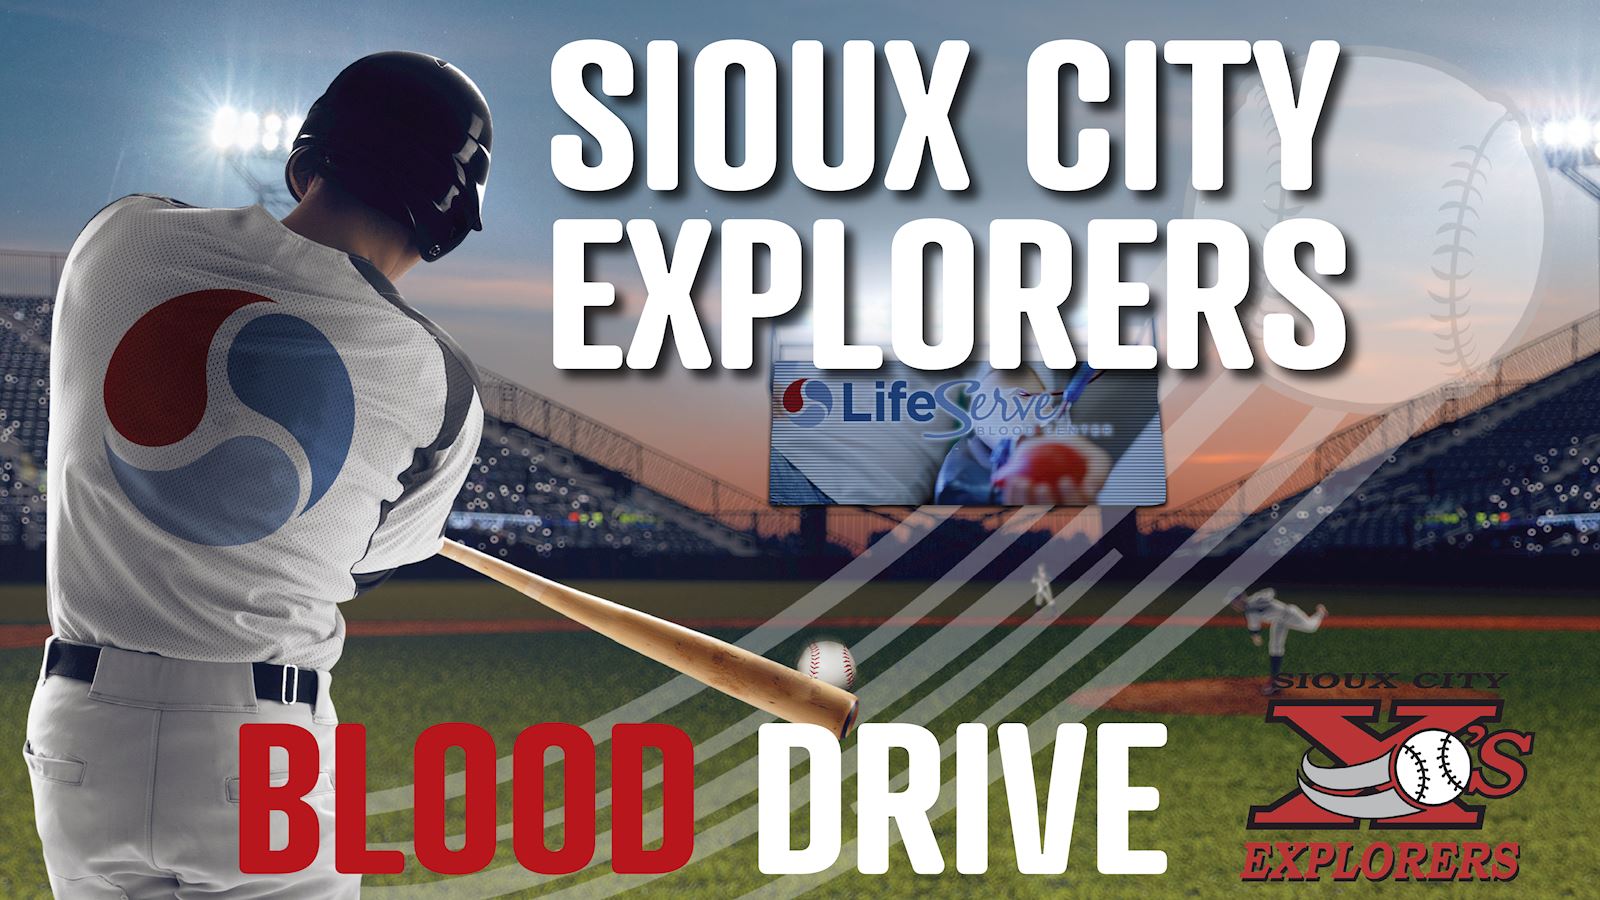 The Sioux City Explorers Blood Drive